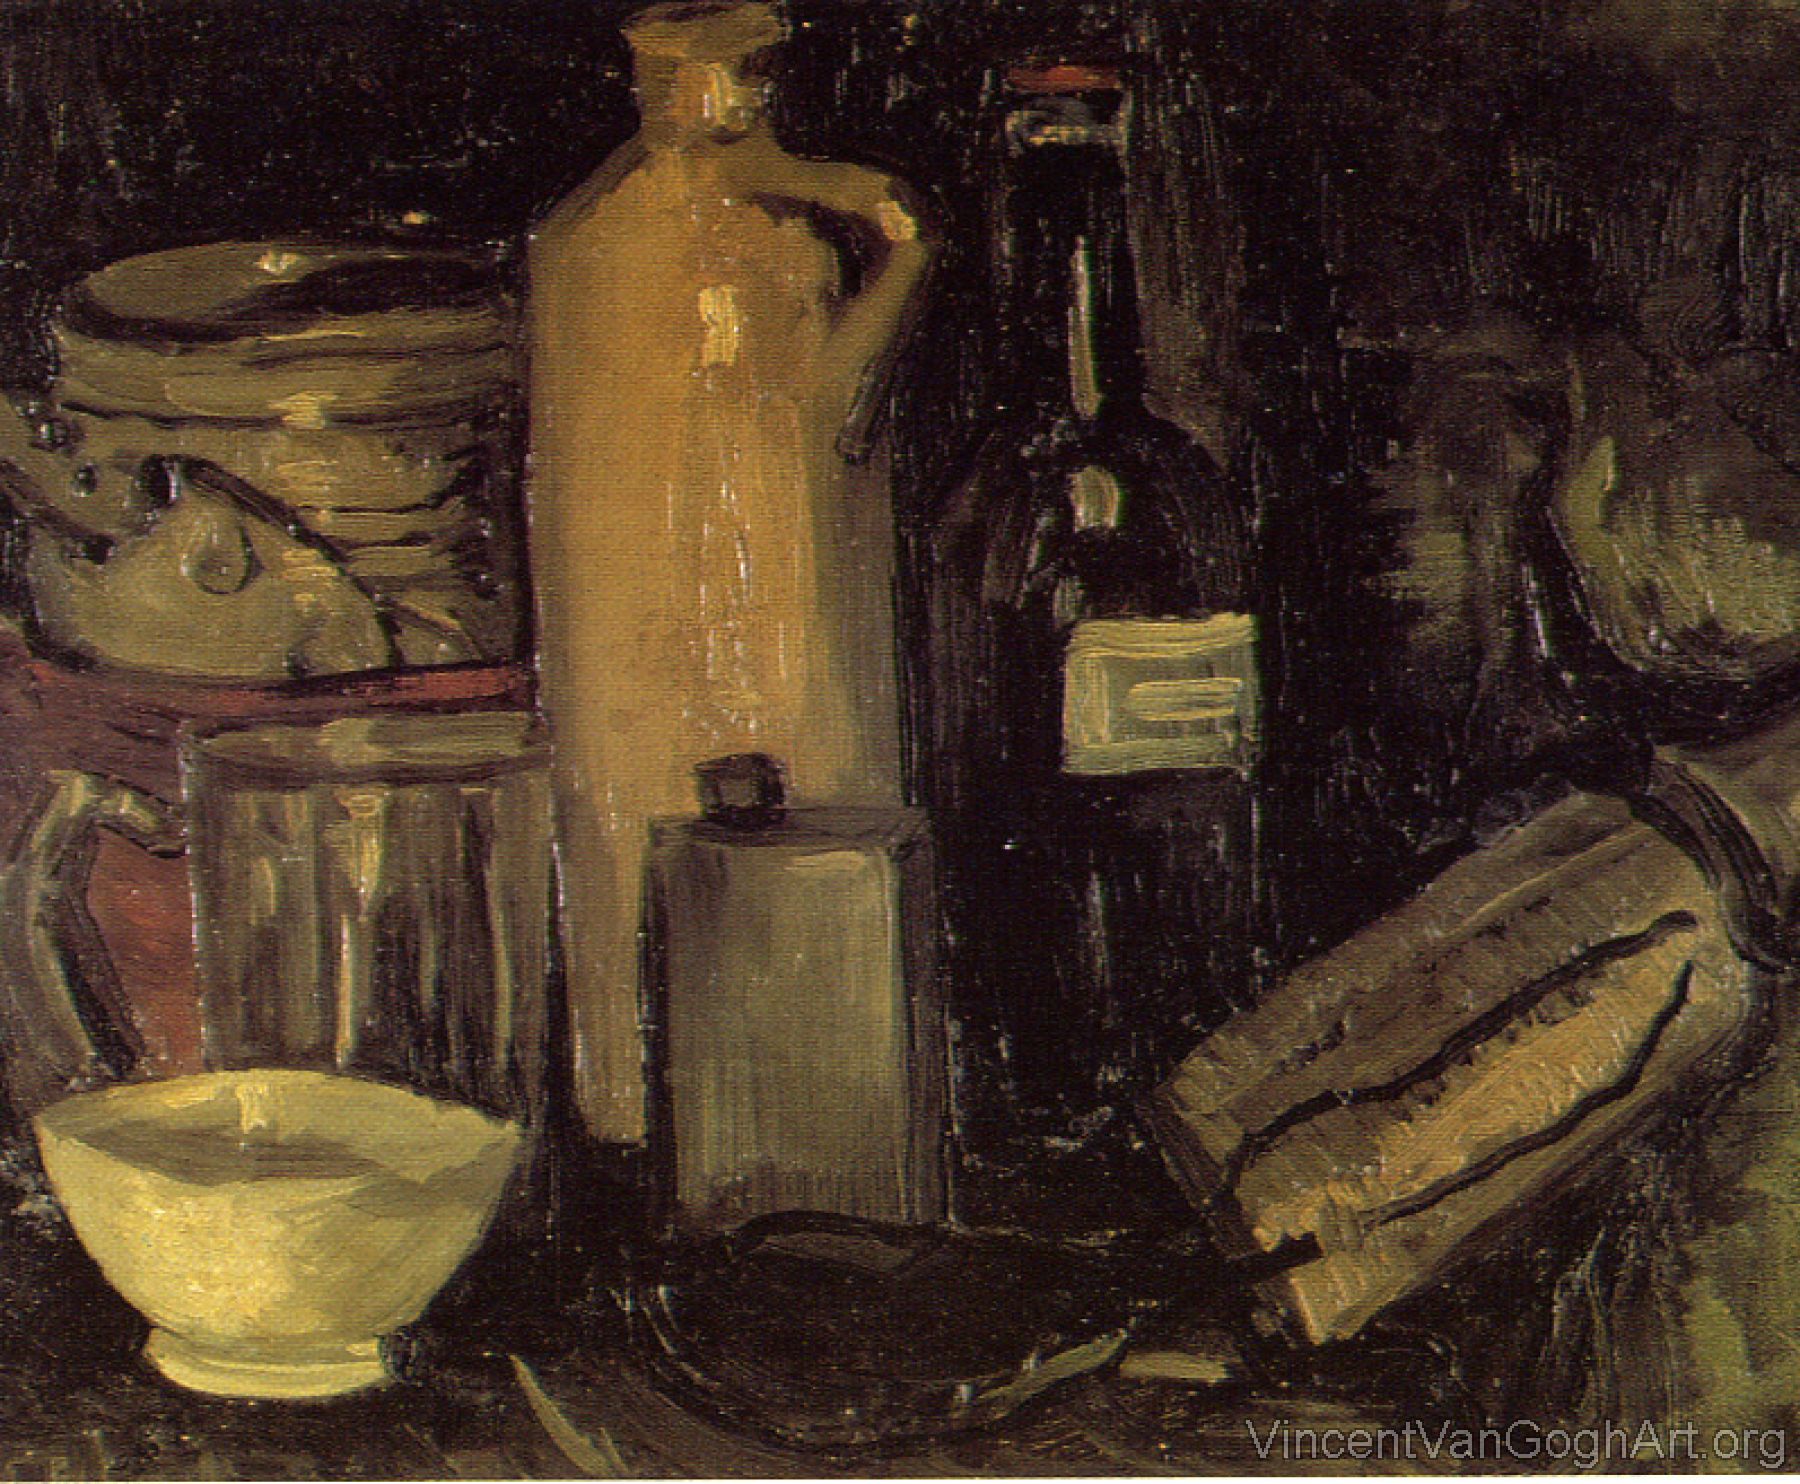 Still Life with Pots,Jar and Bottles